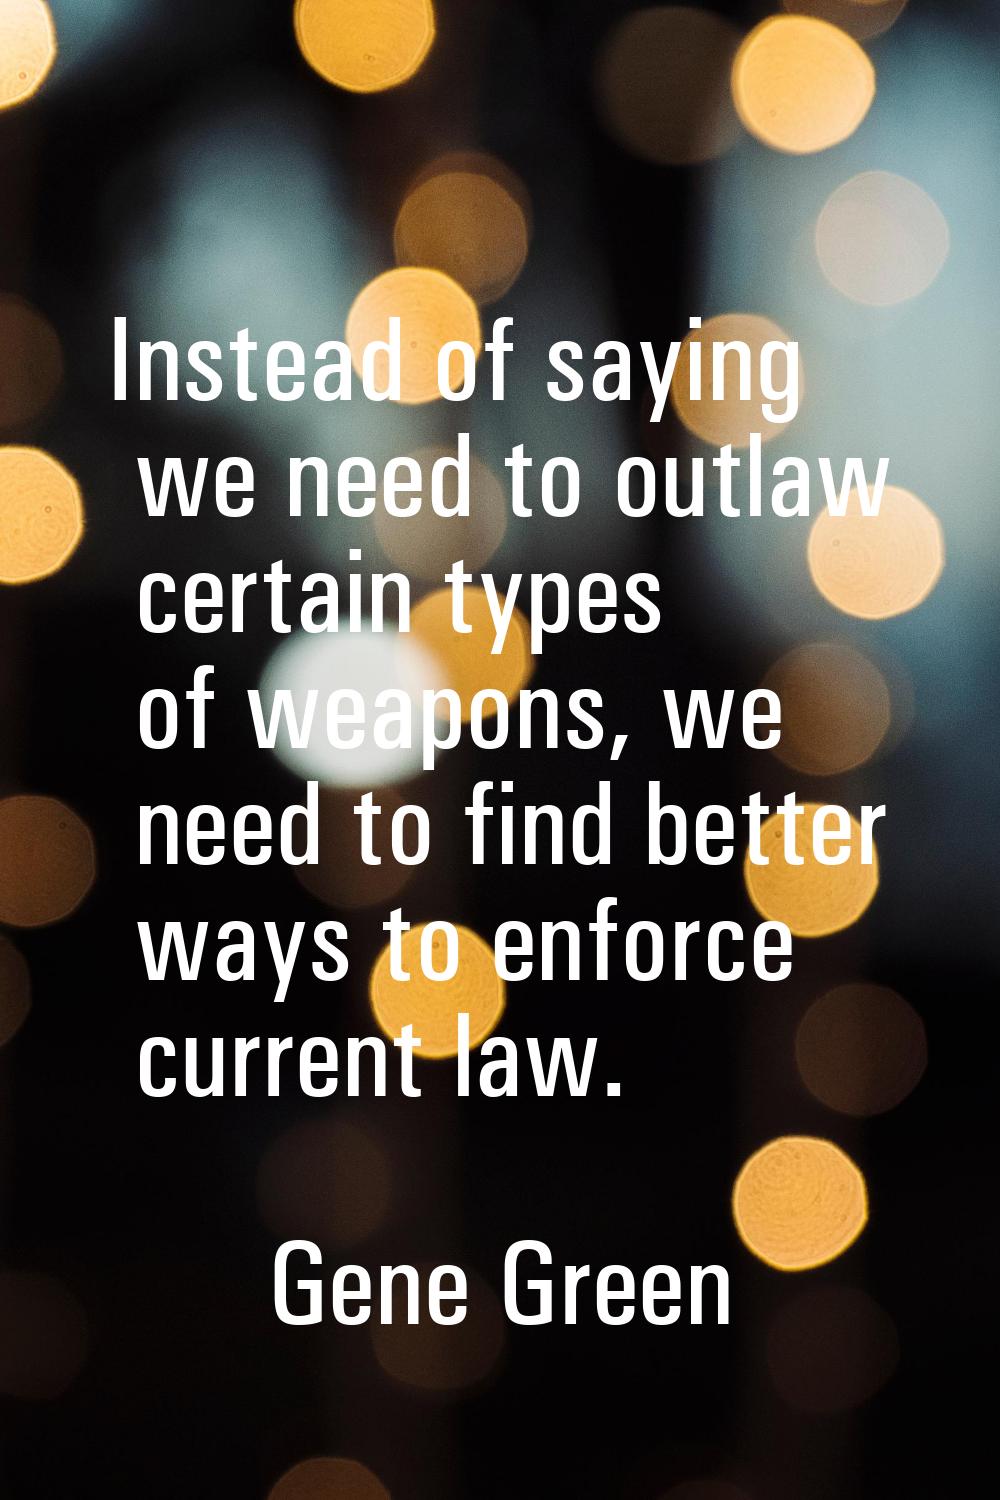 Instead of saying we need to outlaw certain types of weapons, we need to find better ways to enforc